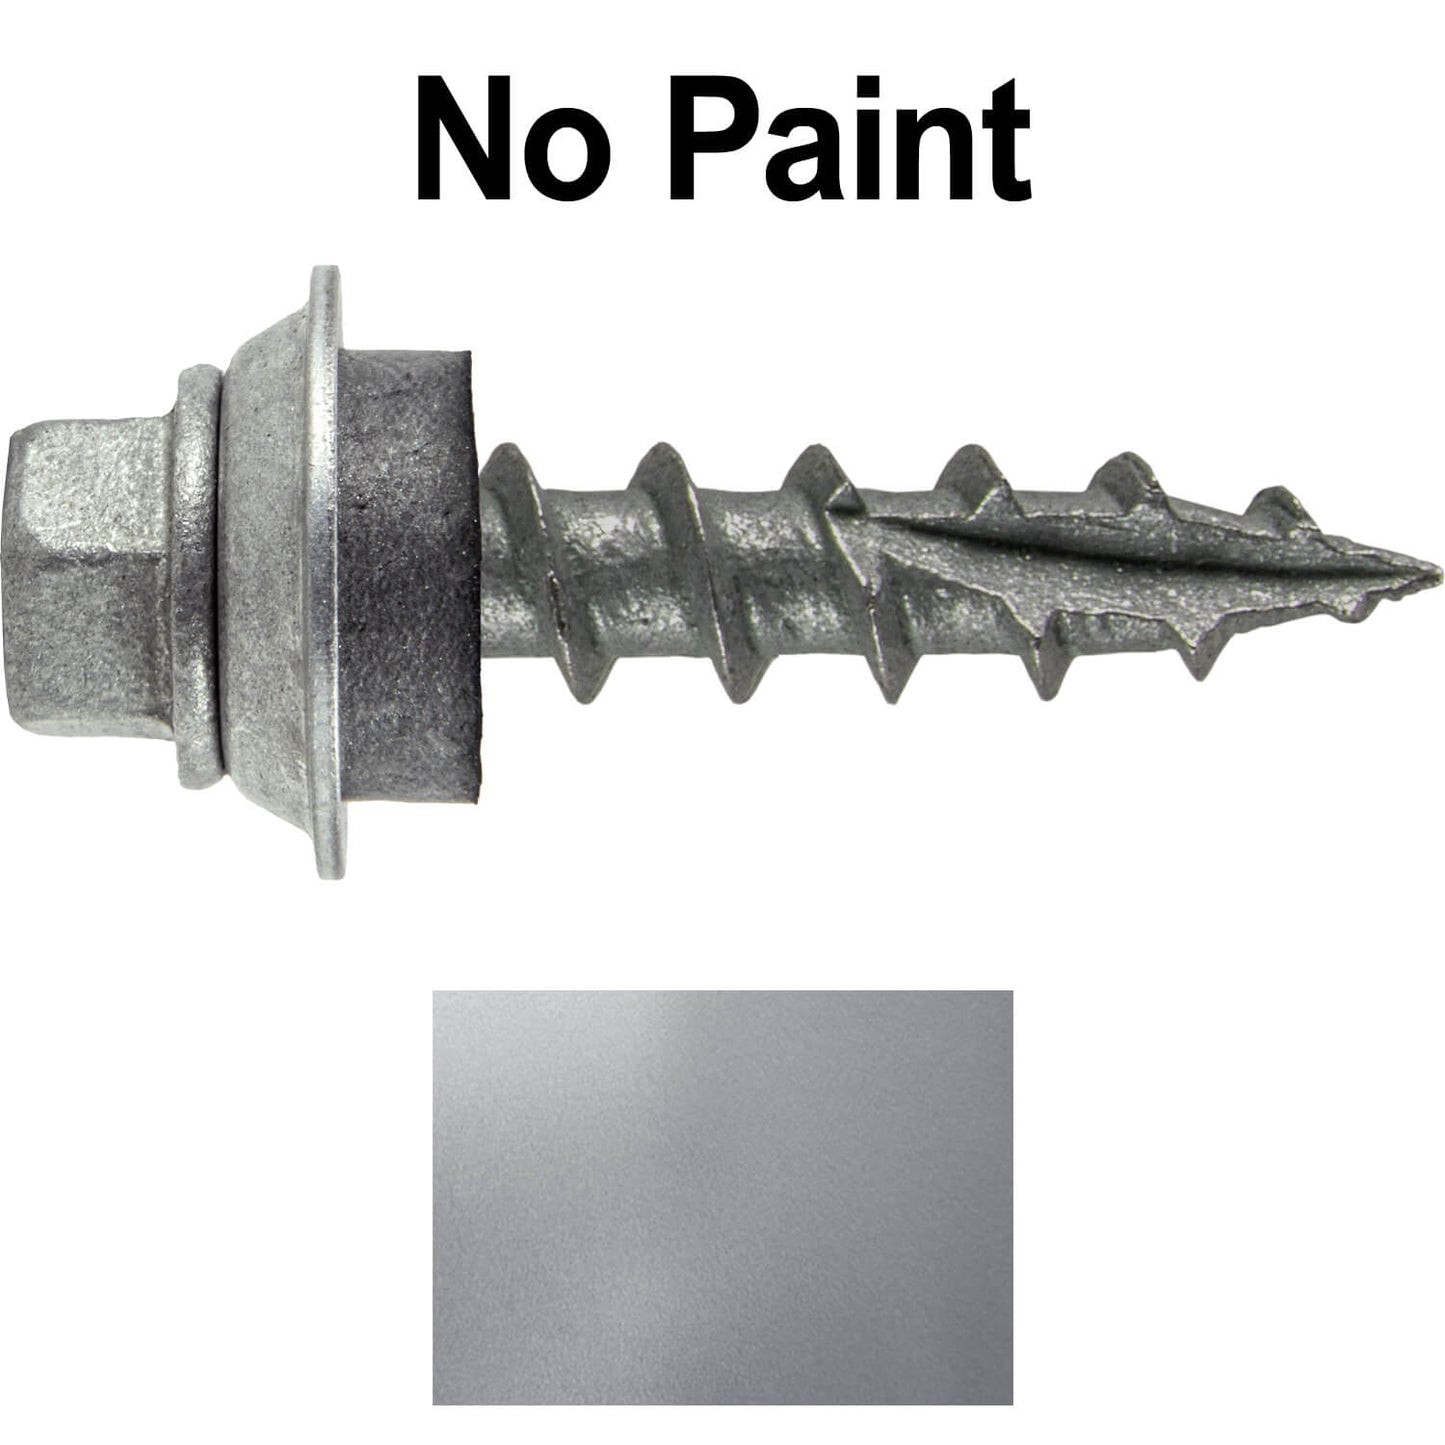 12 X 1"  Metal to Wood  ROOFING SCREW For OSB AND PLYWOOD - 1/4" Hex Head - Assembled Washer - Galvanized -- Type 17 Tip